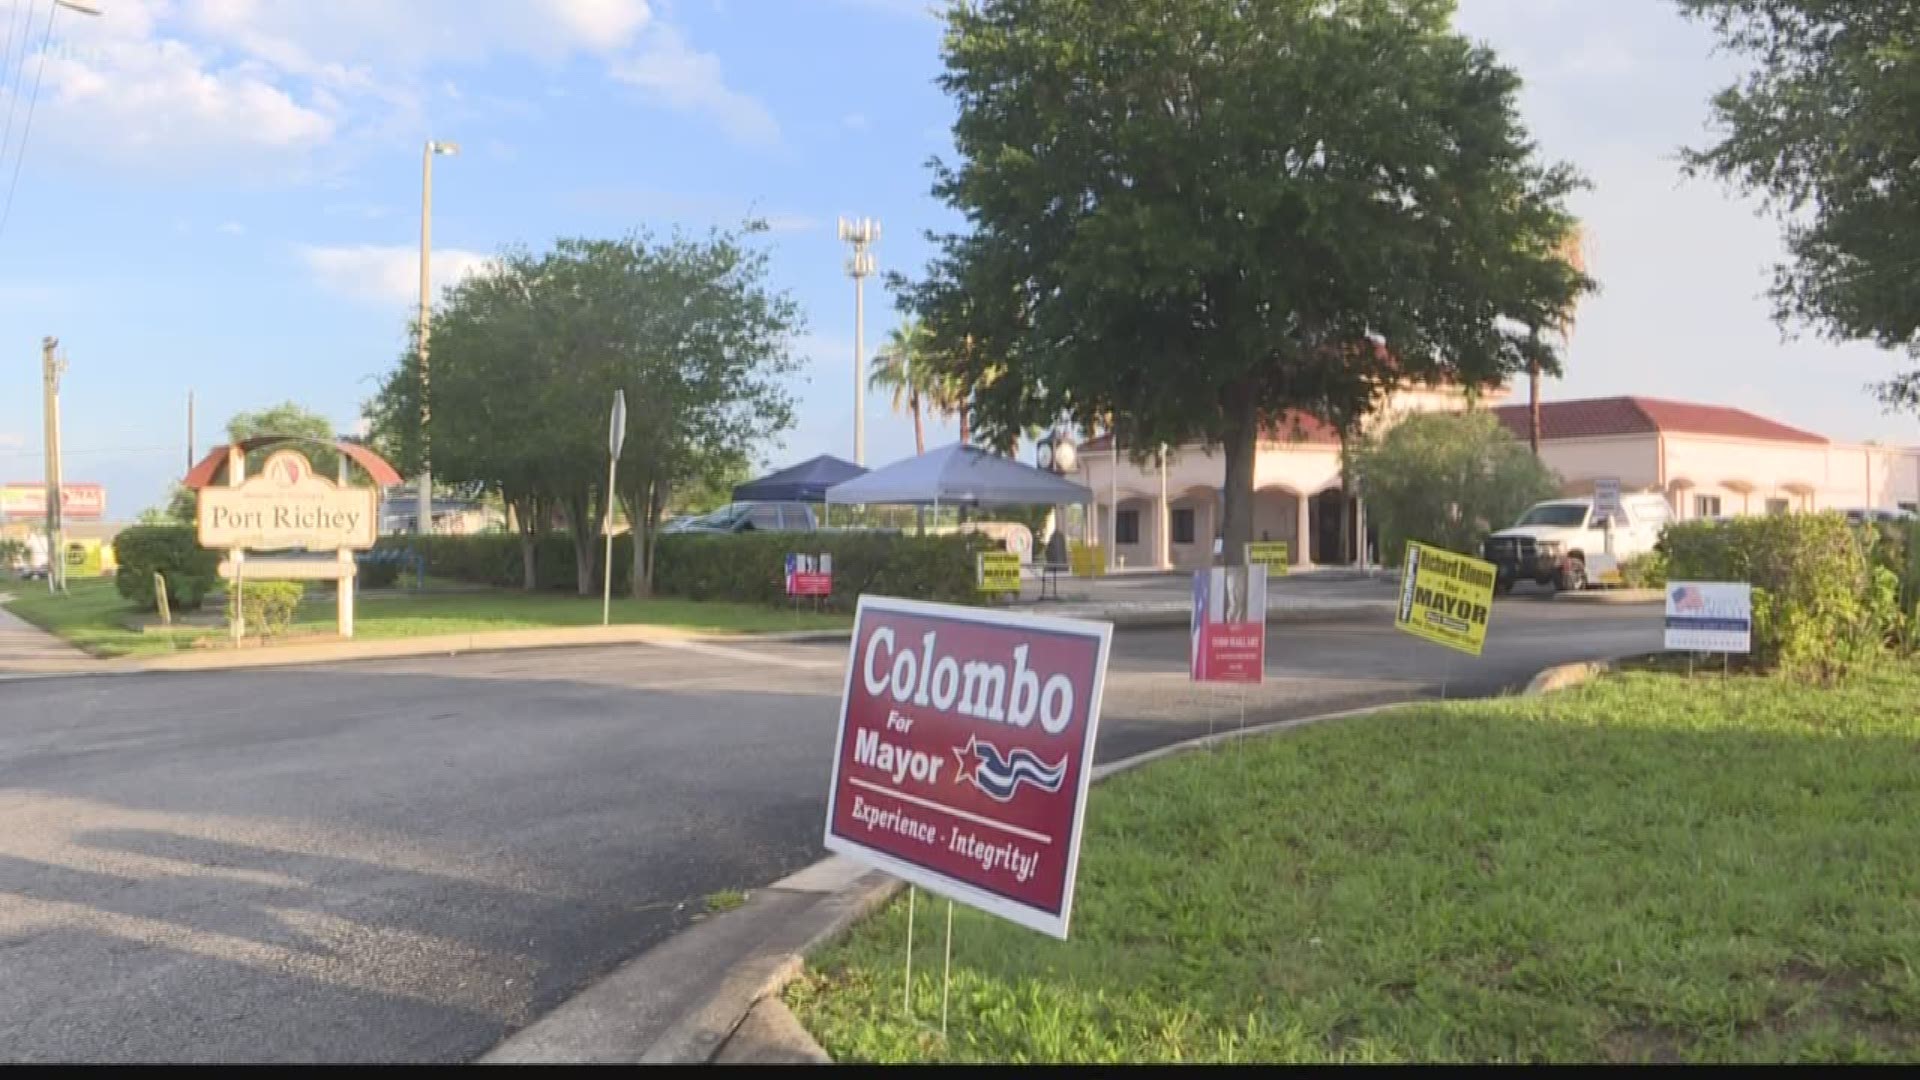 A special election Tuesday will possibly bring a close to the Port Richey mayoral saga.

Five people -- Richard Bloom, William Columbo, Todd Maklary, Gregory Smithwick and Scott Tremblay -- are running for mayor, a post that has been empty for weeks.

The saga began in February, when Mayor Dale Massad was arrested after allegedly shooting at Pasco County deputies who were serving a search warrant at his home.

At the time, Pasco County Sheriff Chris Nocco called Massad a "known drug user."

Florida Gov. Ron DeSantis suspended Massad on Feb. 22, but the mayor resigned from office hours later.